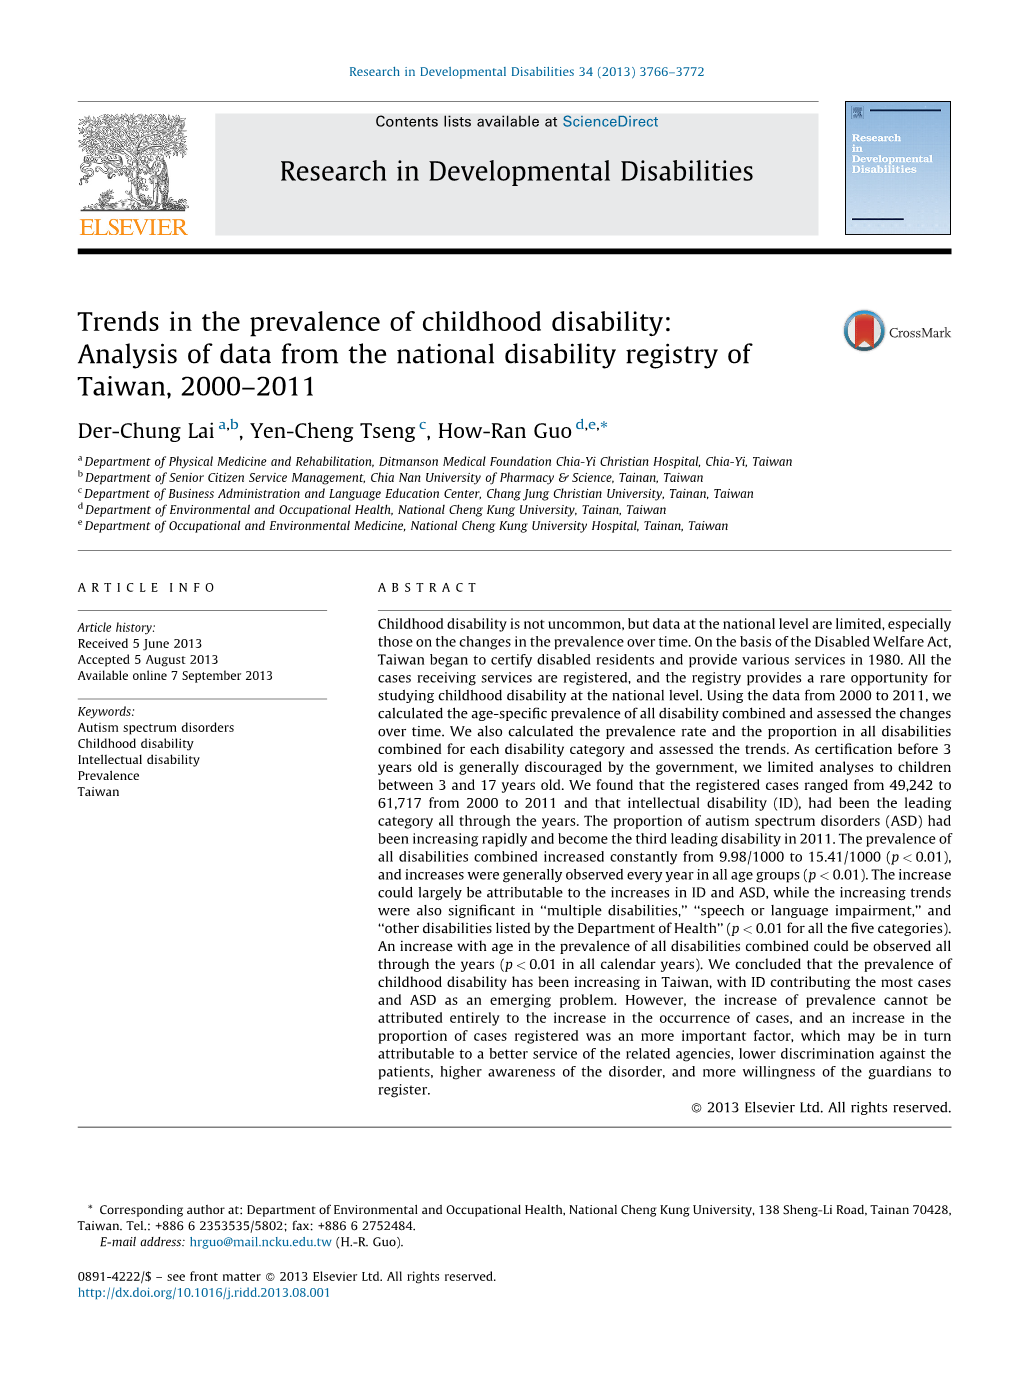 Trends in the Prevalence of Childhood Disability: Analysis of Data from The